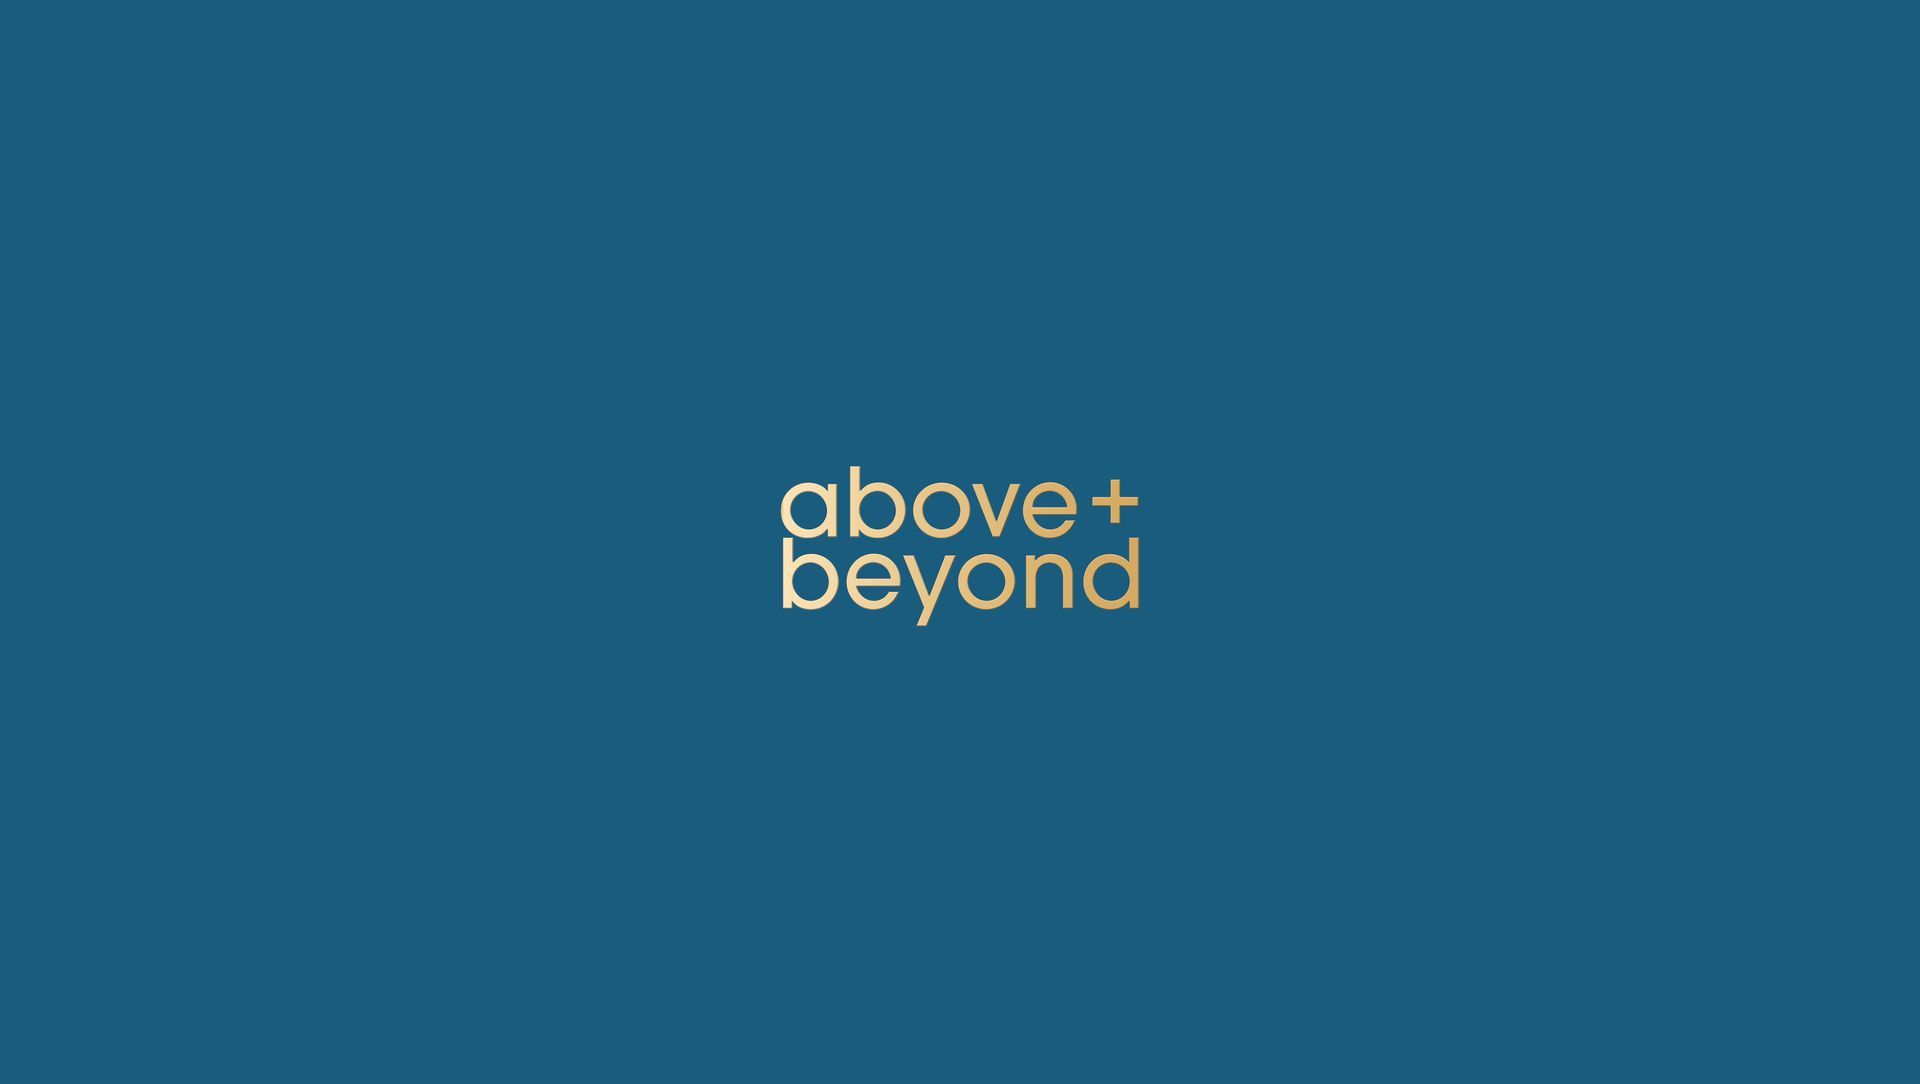 Above & Beyond - brand identity package